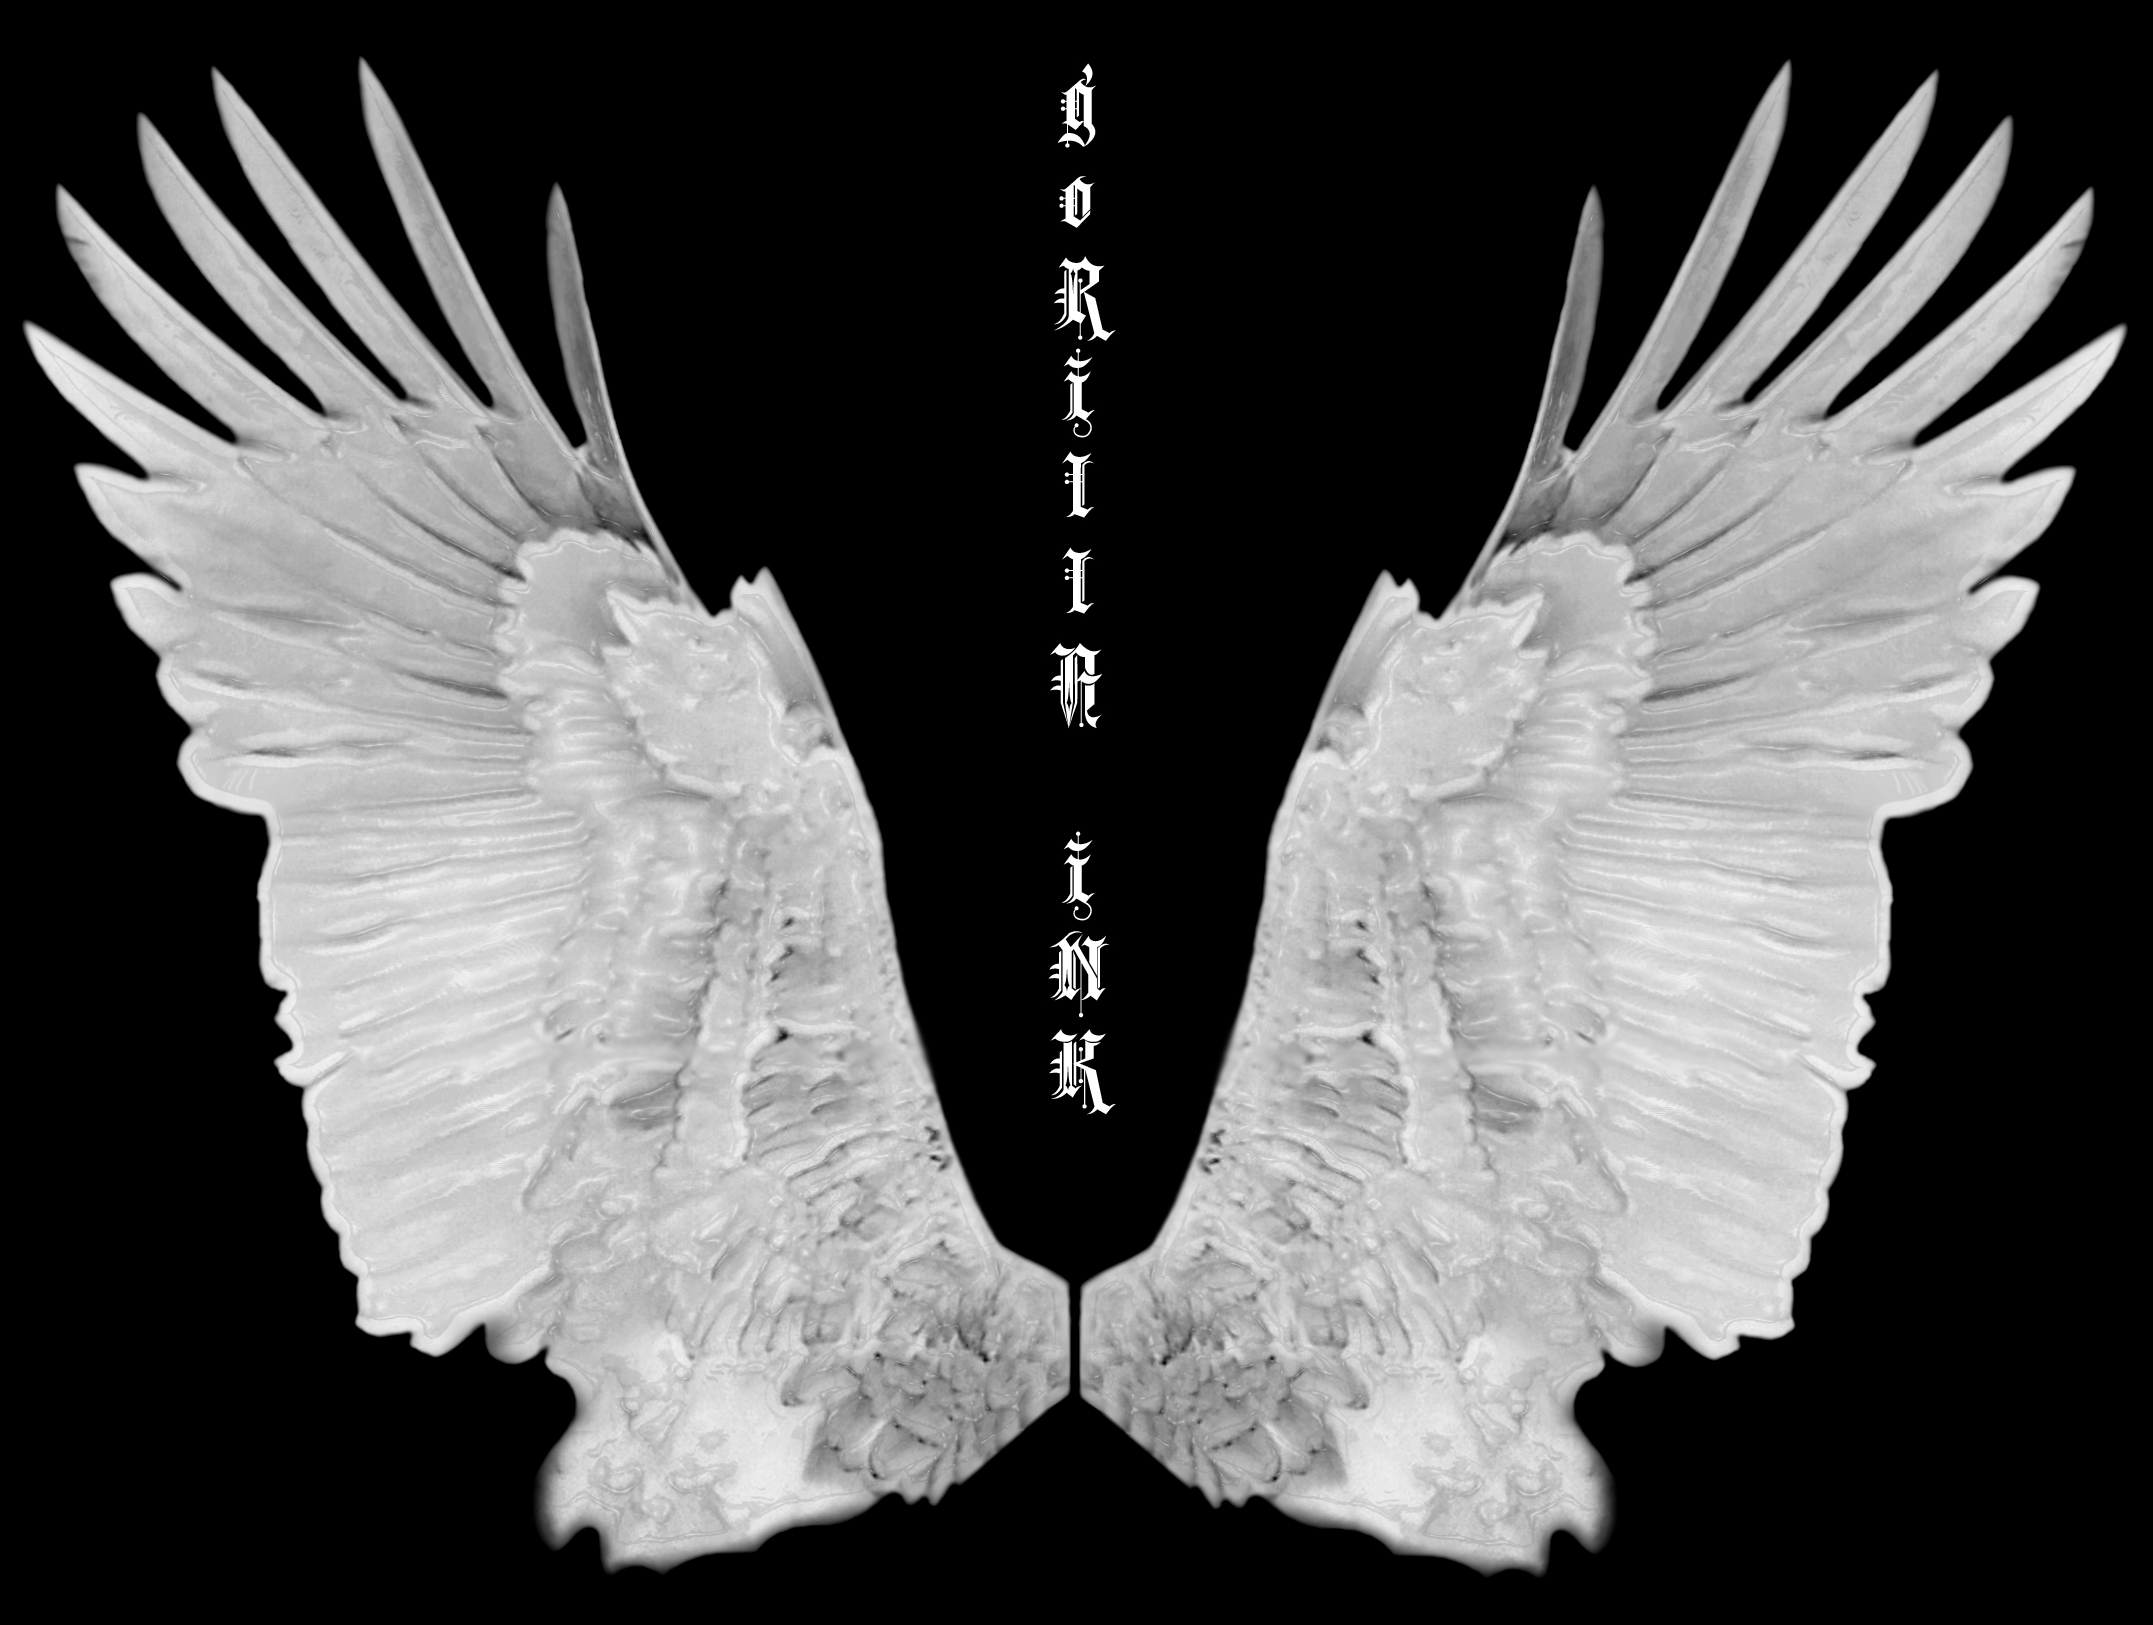 Angel Wings by goRillA-iNK on Clipart library